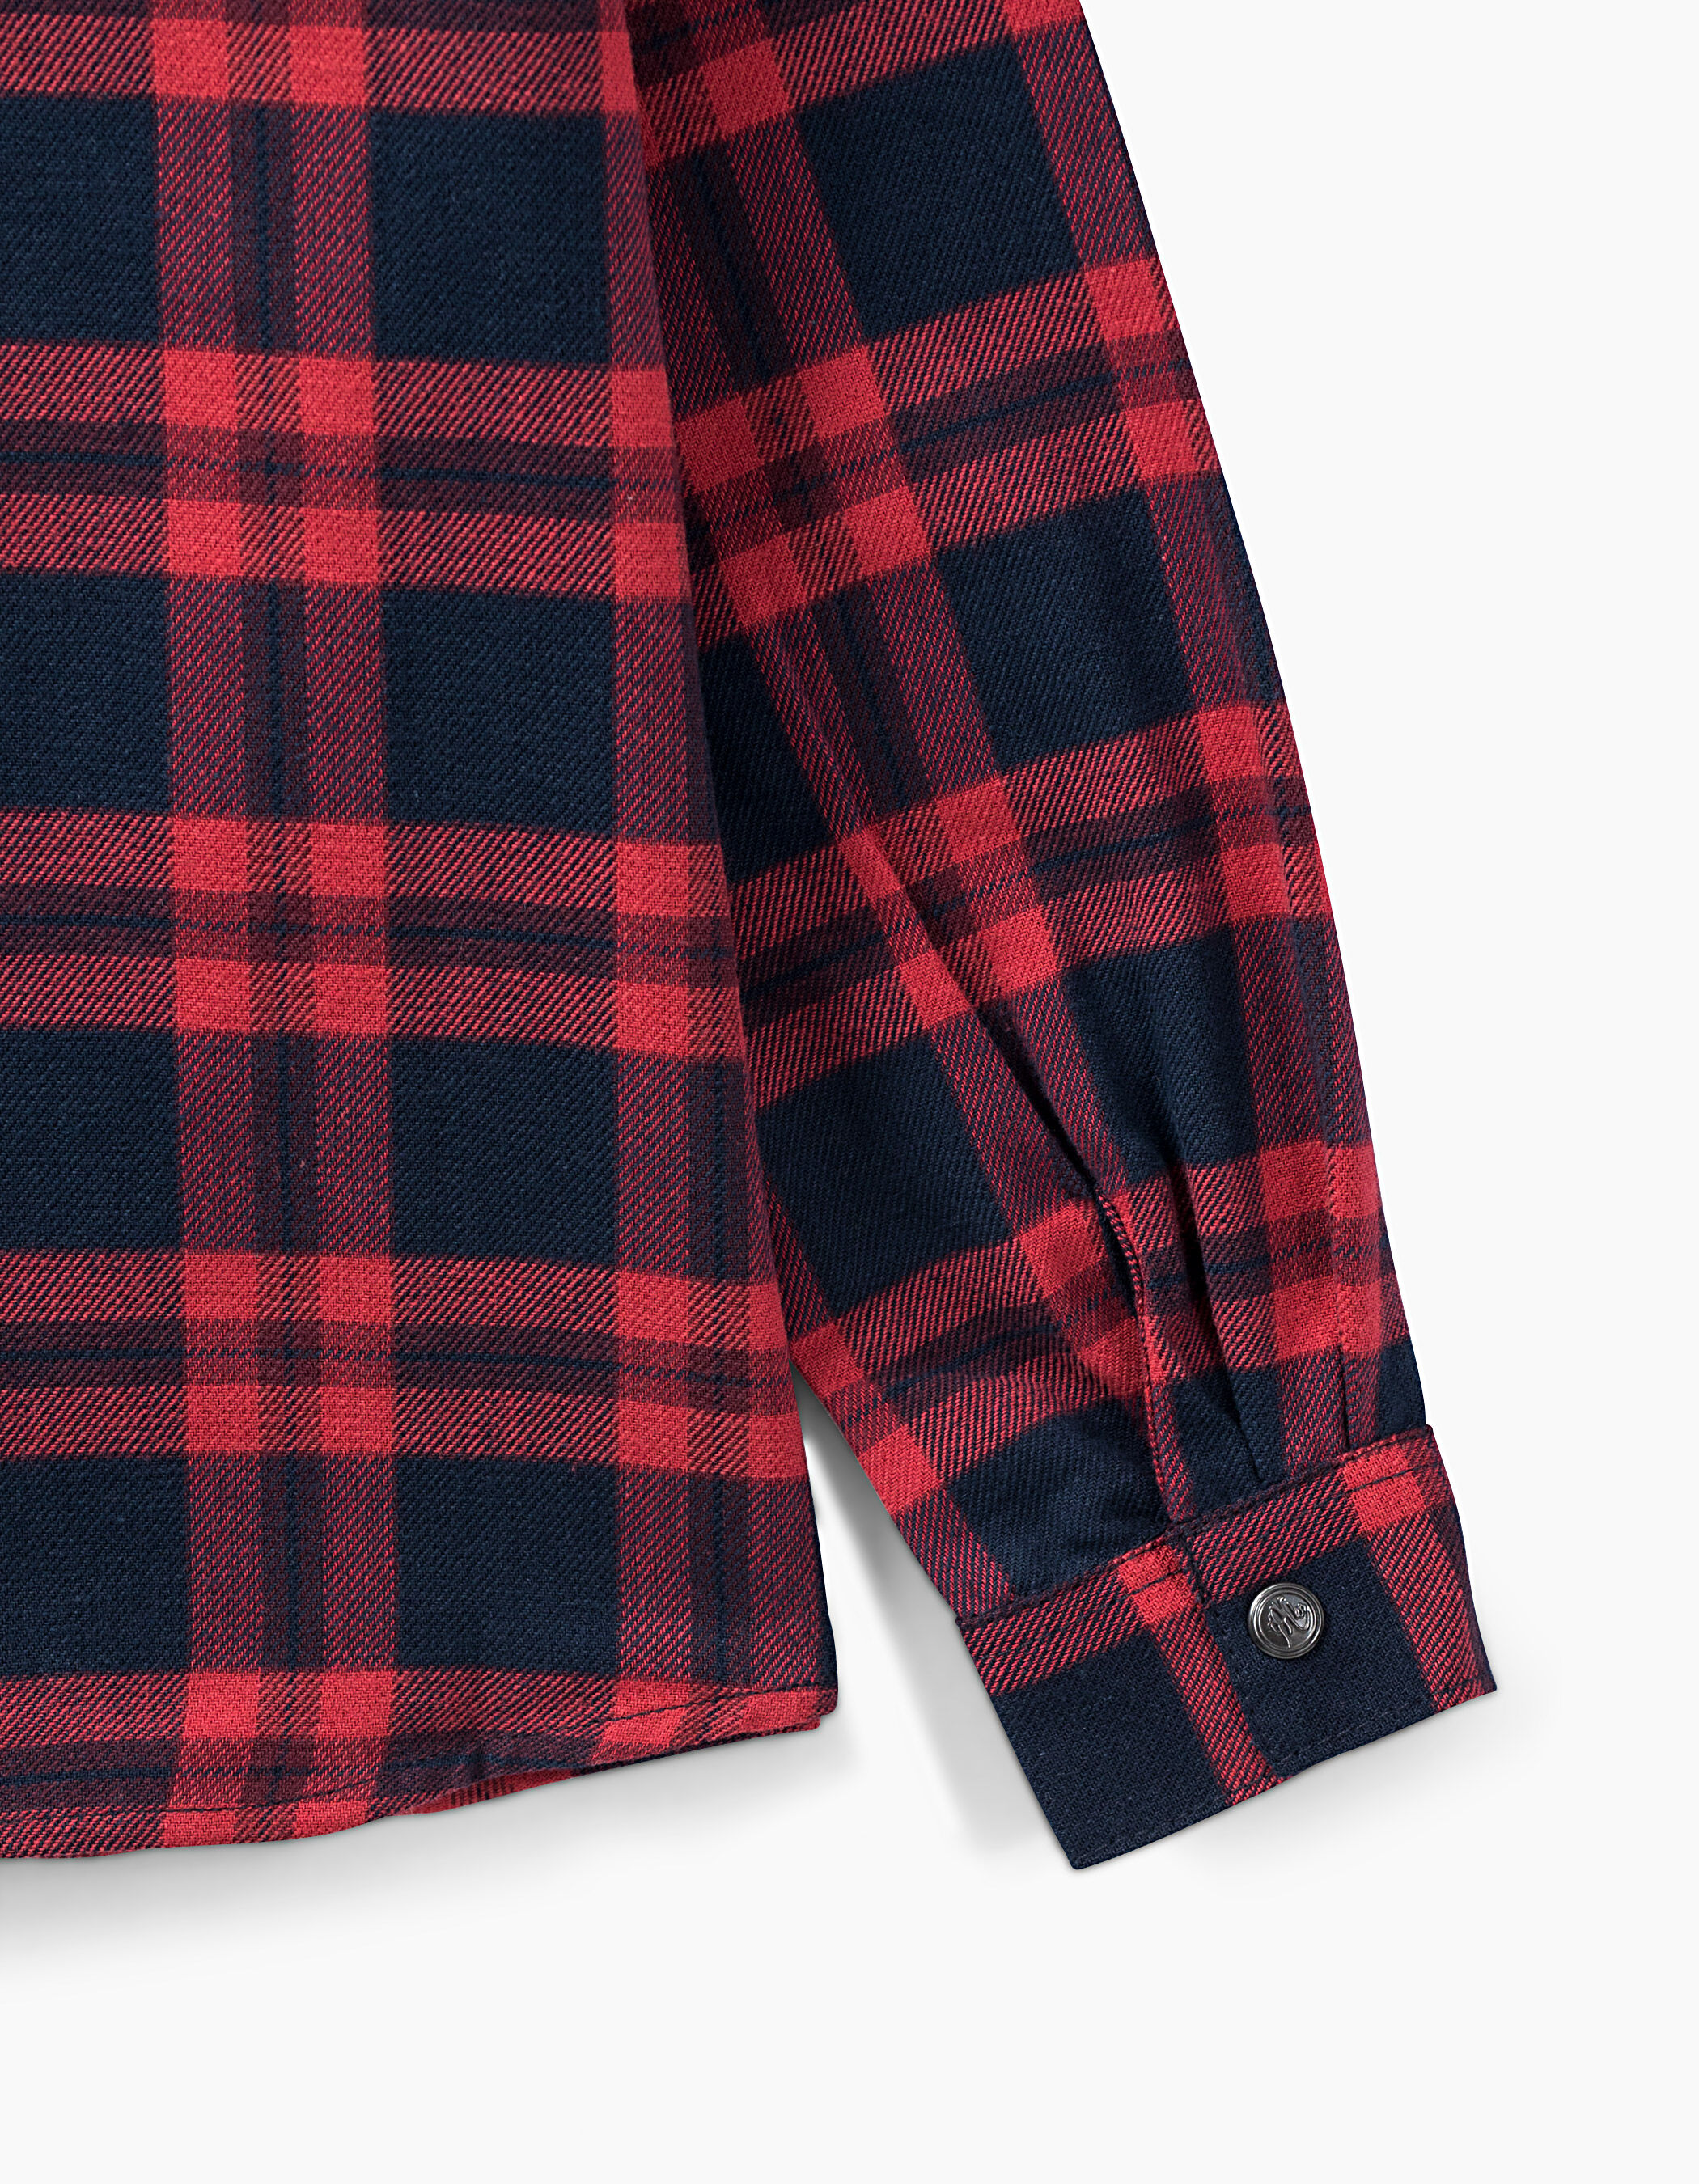 Boys' navy and red checked shirt